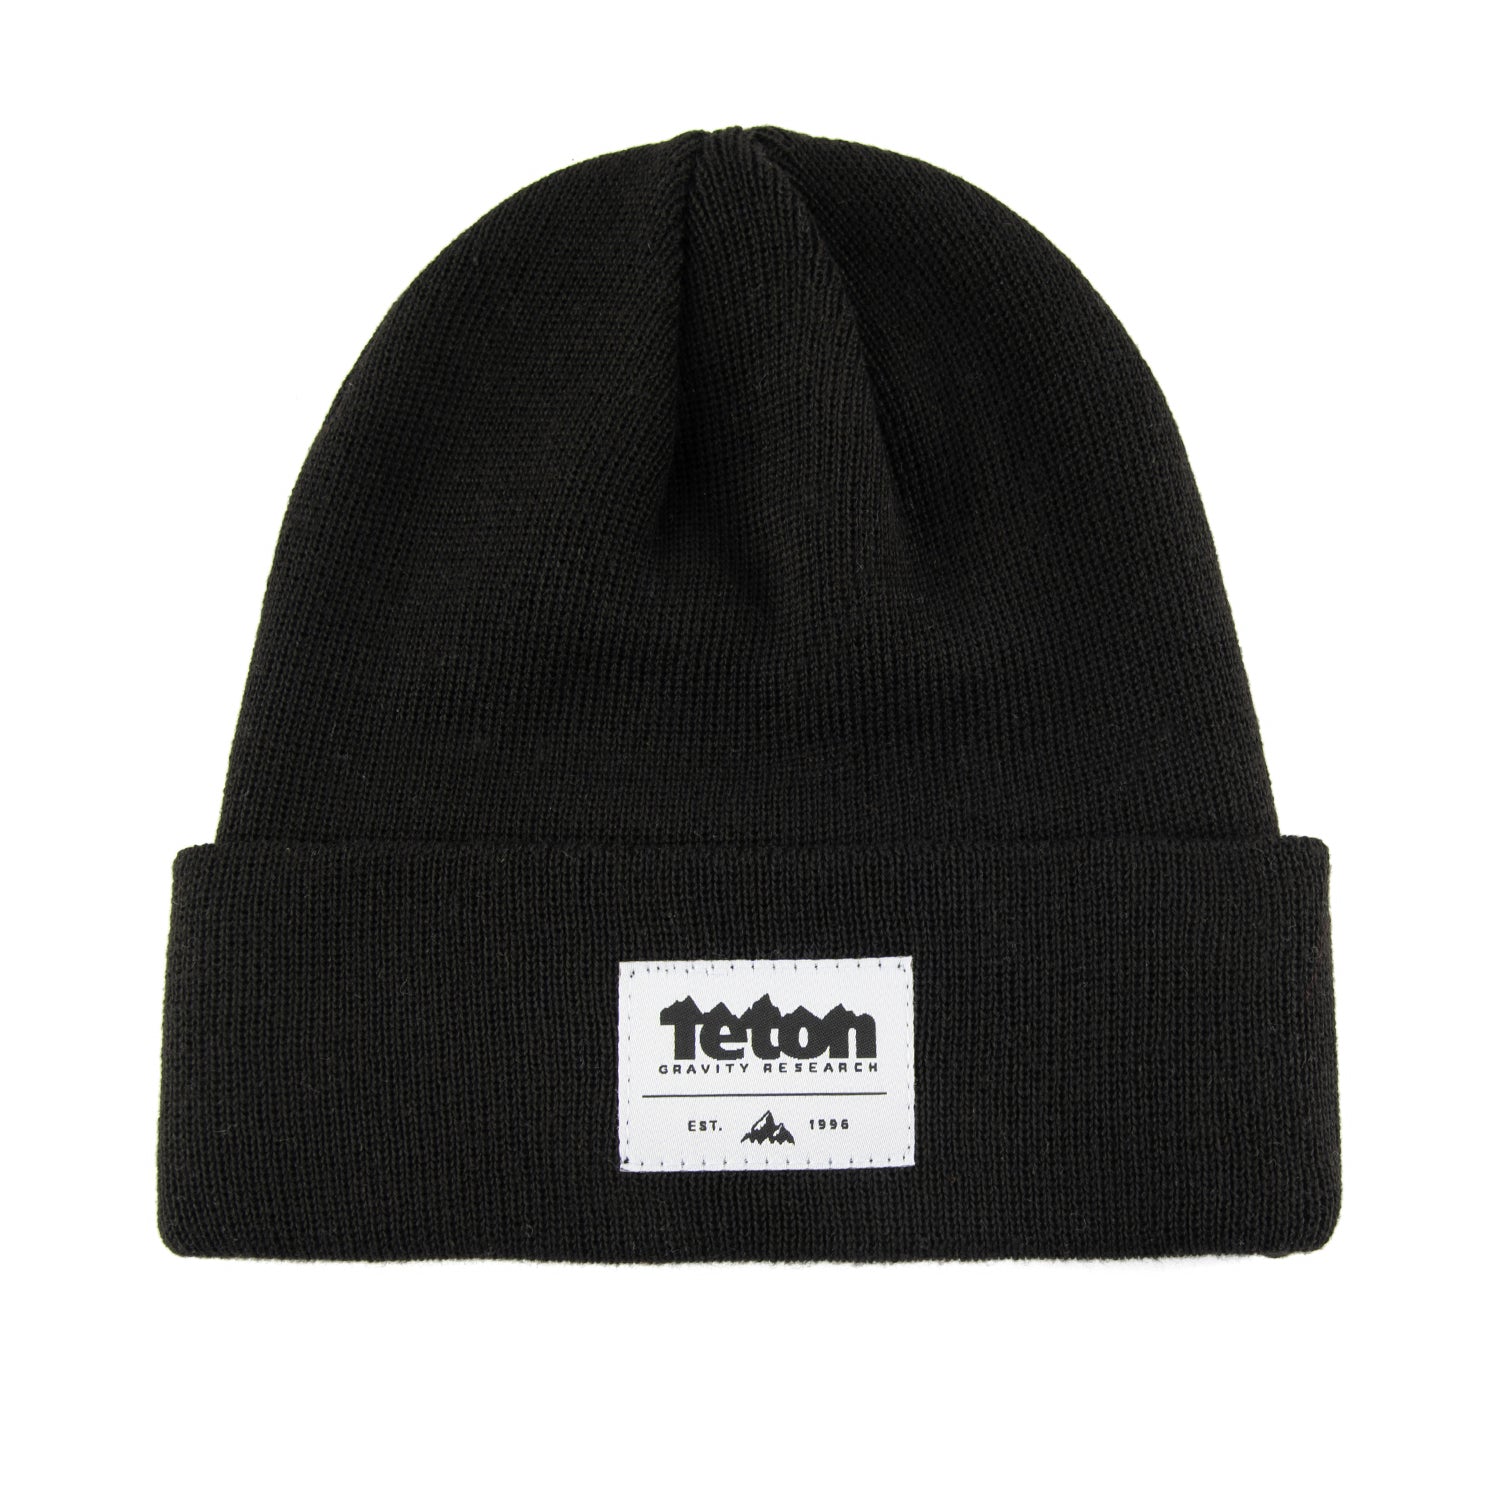 Kids Recycled OG Knit Beanie - Teton Gravity Research